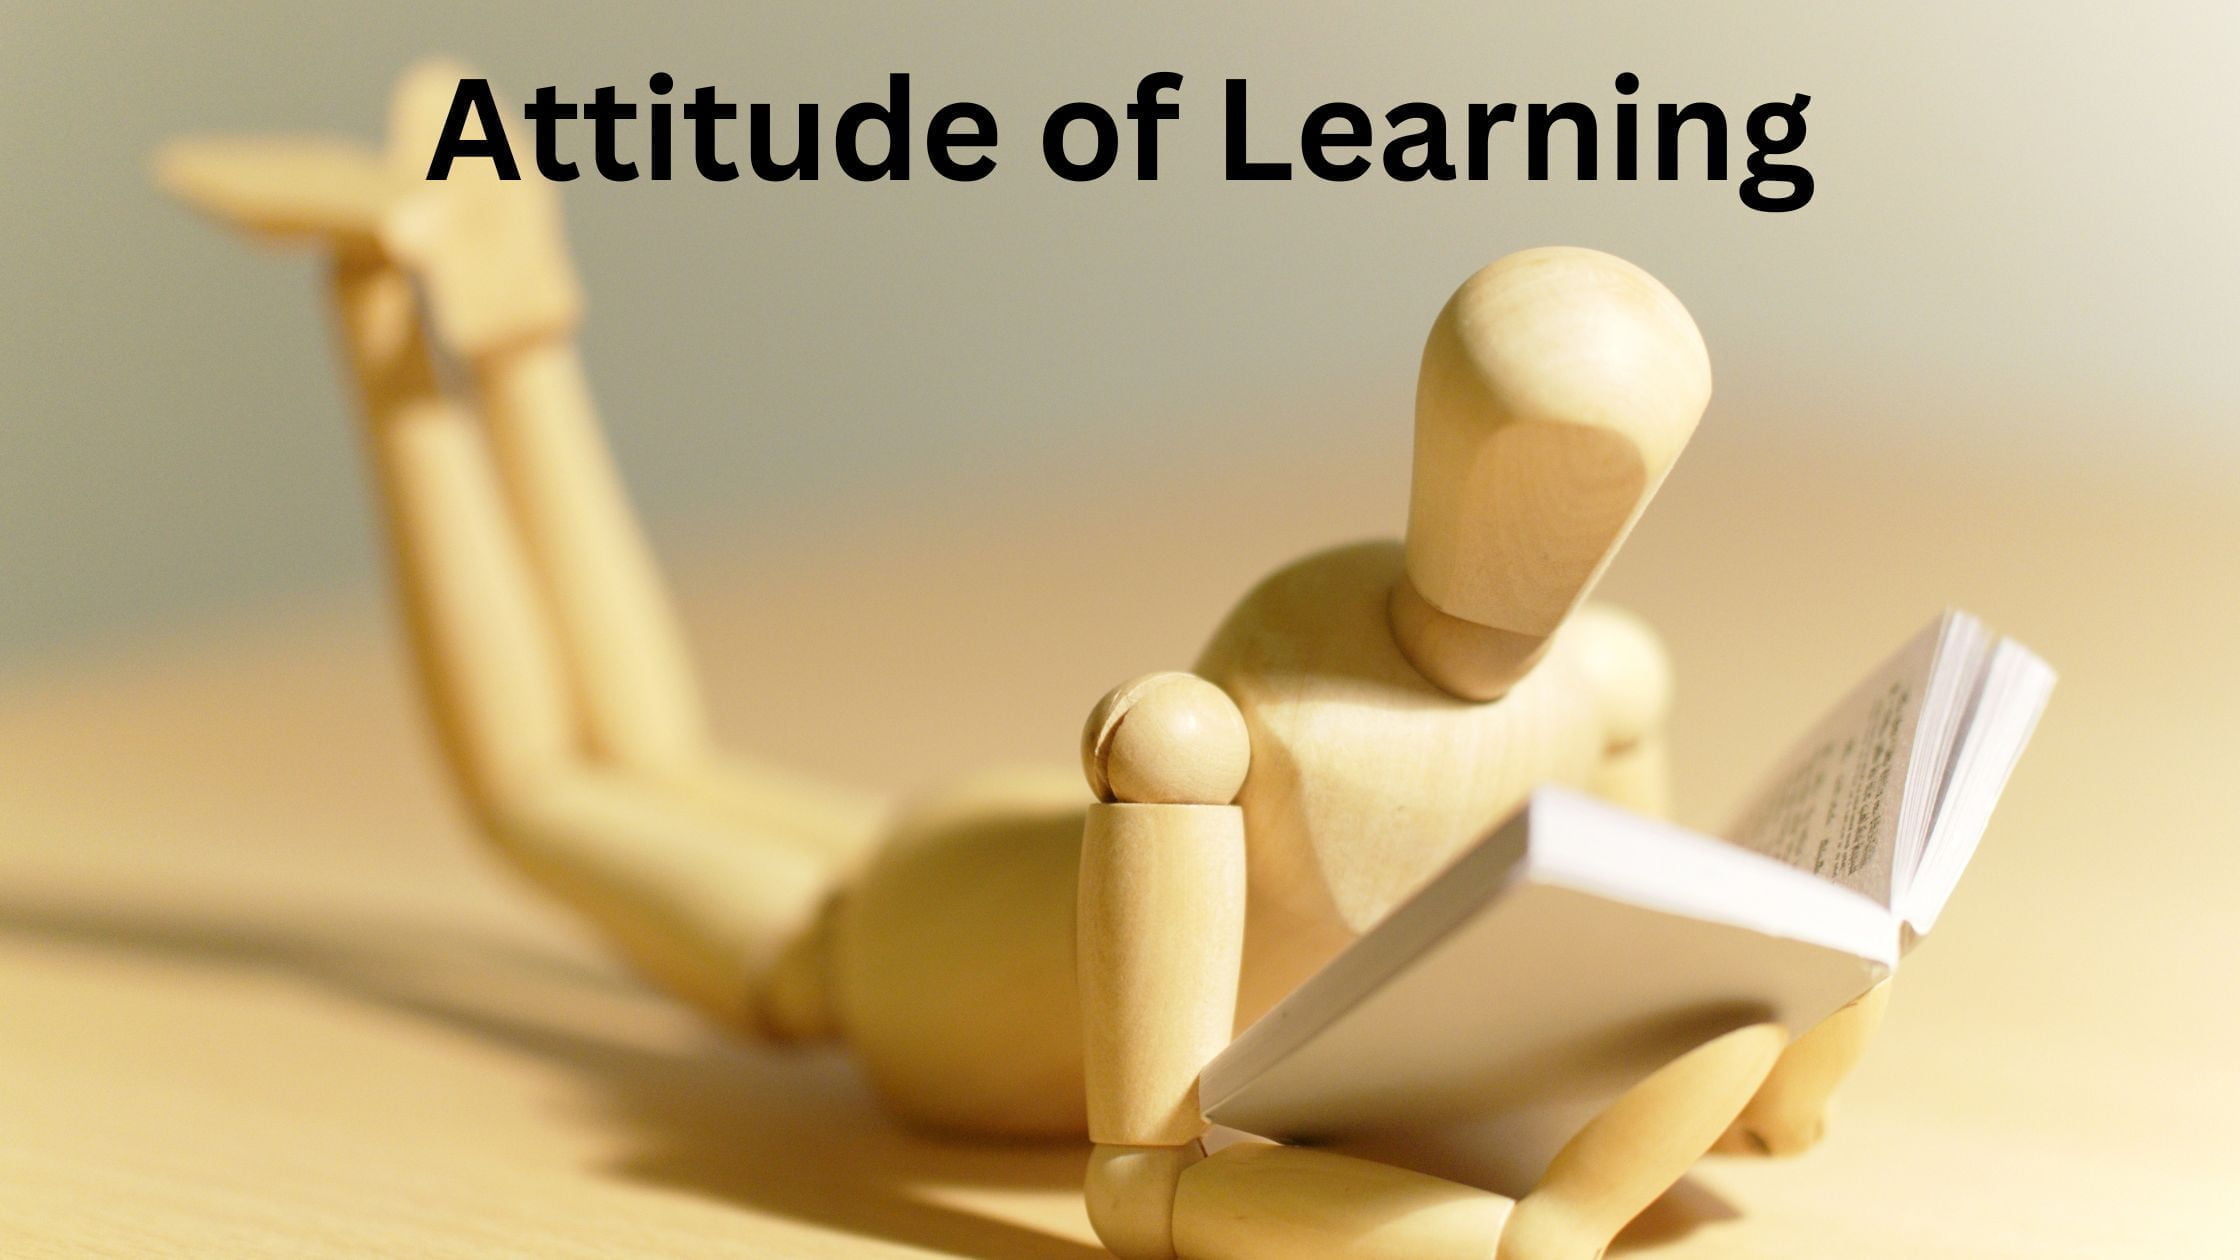 Attitude of learning